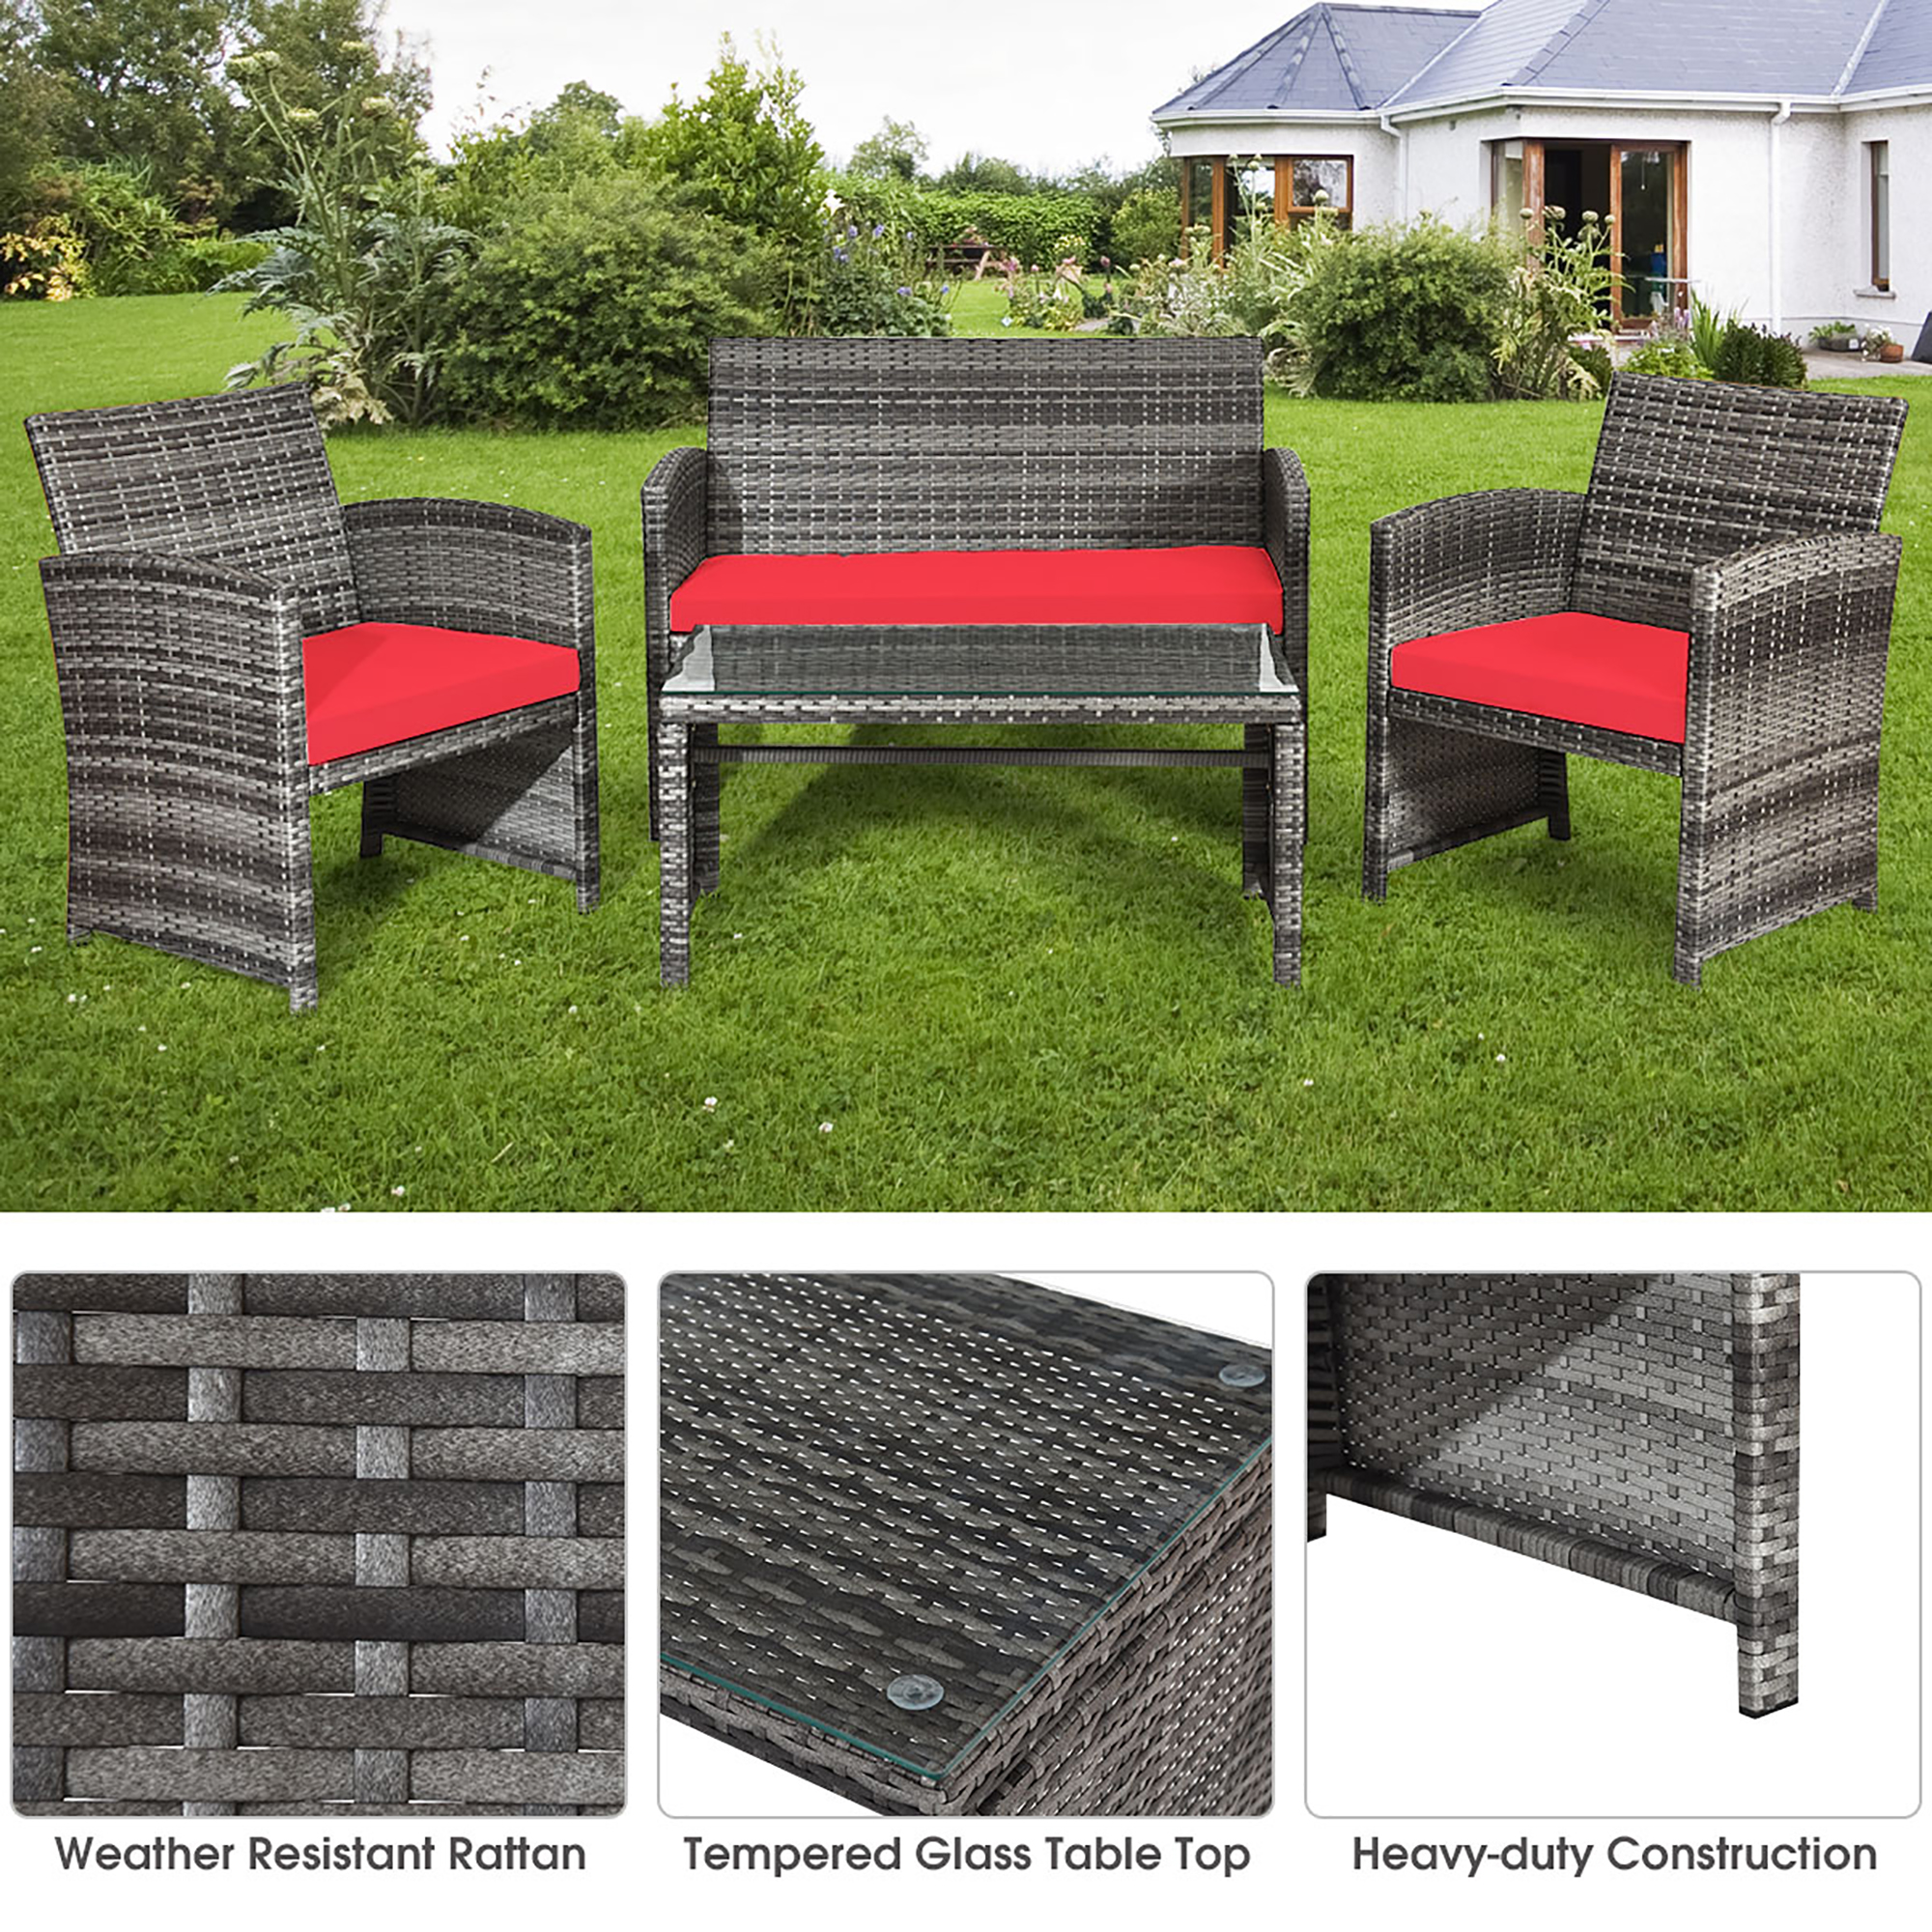 Costway 4PCS Patio Rattan Conversation Glass Table Top Cushioned Sofa Red - image 4 of 10